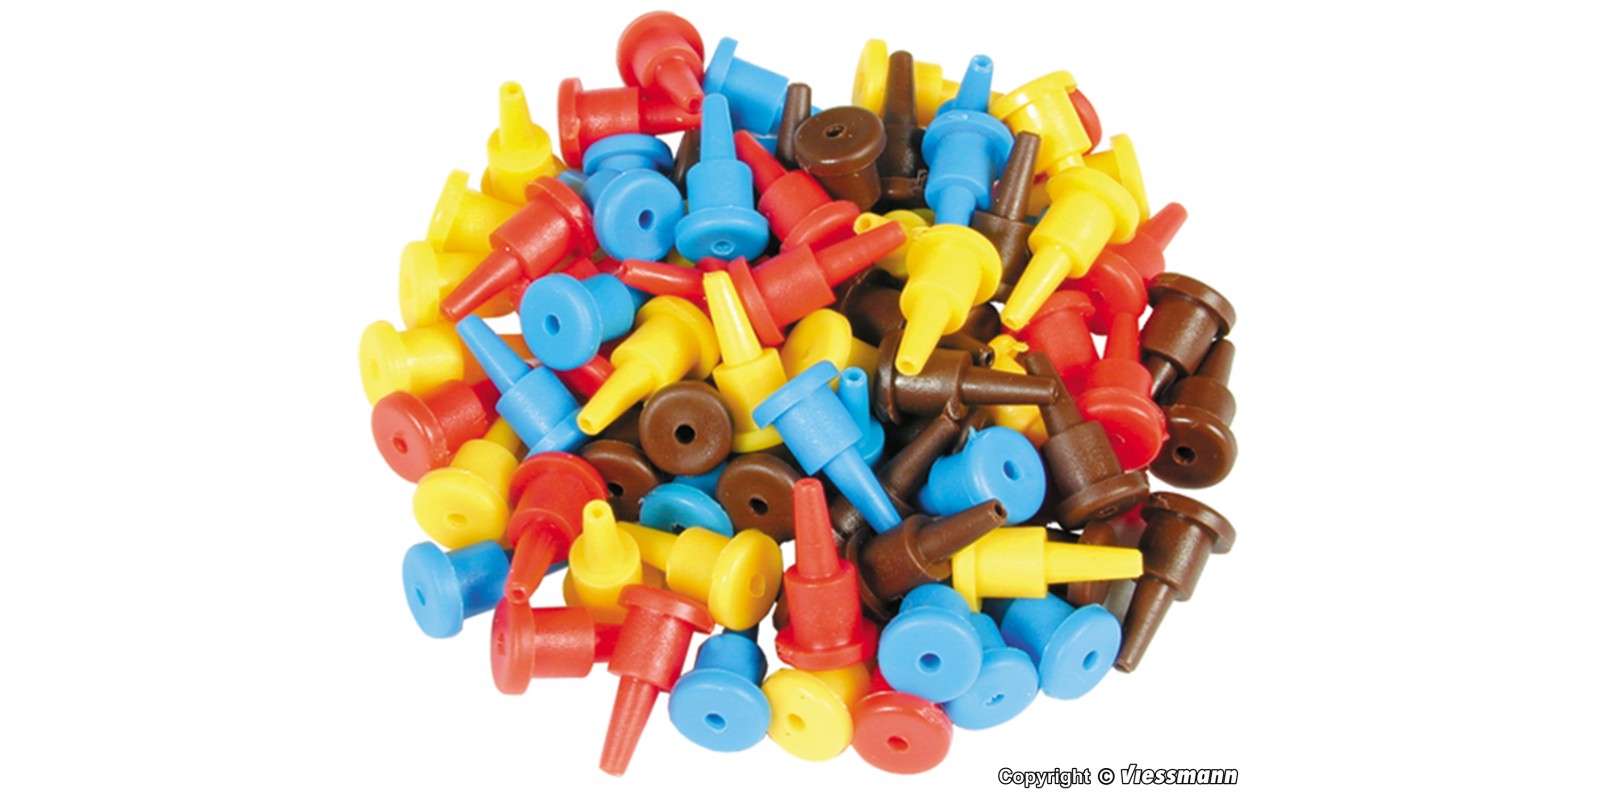 VI6831 Plugs set, 40 pieces sorted in red, yellow, blue, brown 